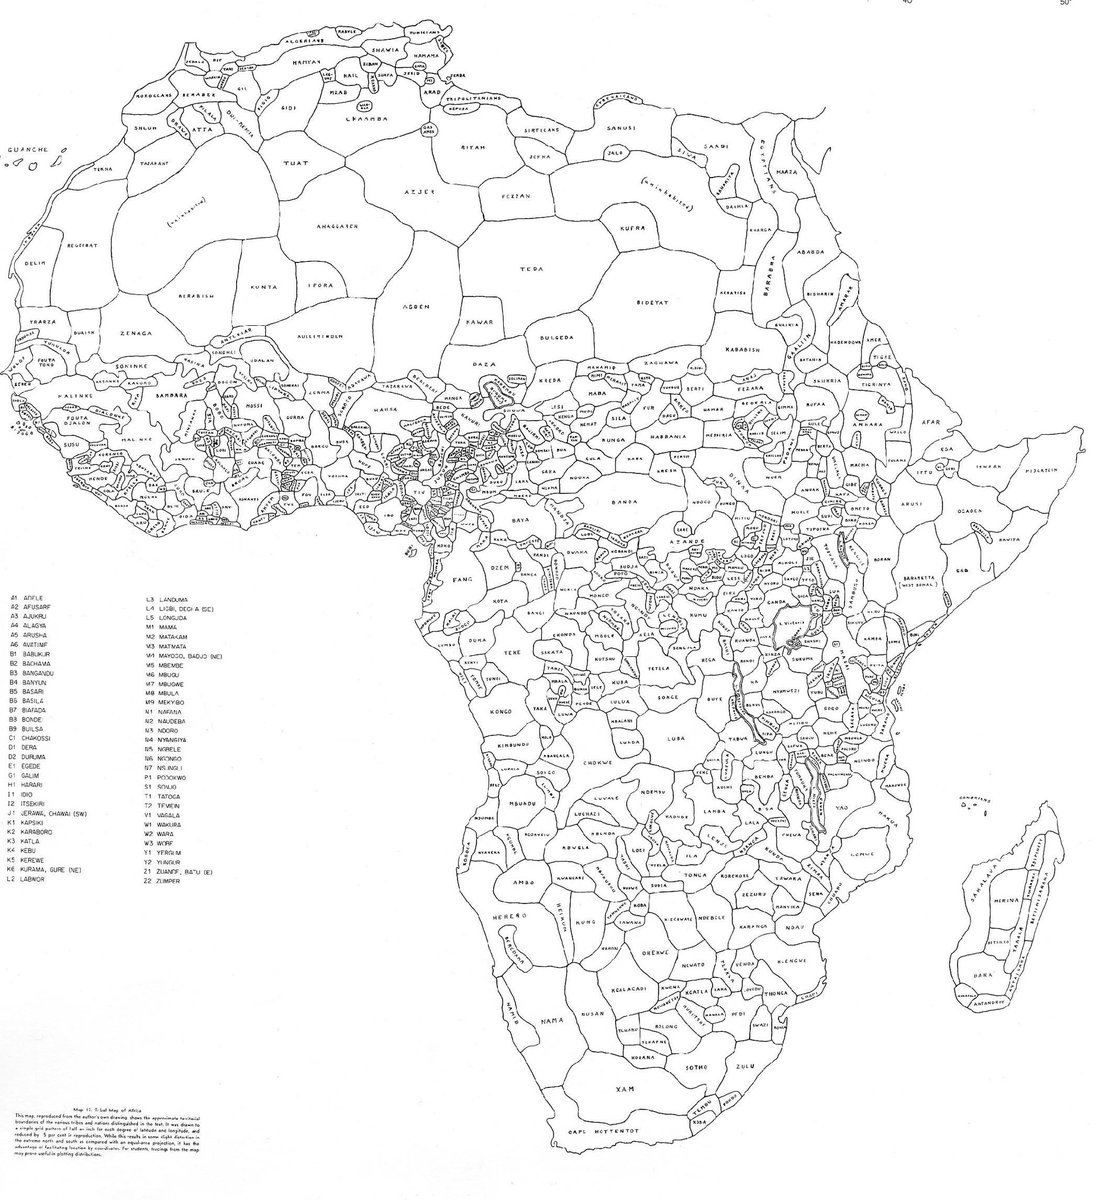 Map of Africa using ethnically drawn borders, rather than those drawn by imperial powers.